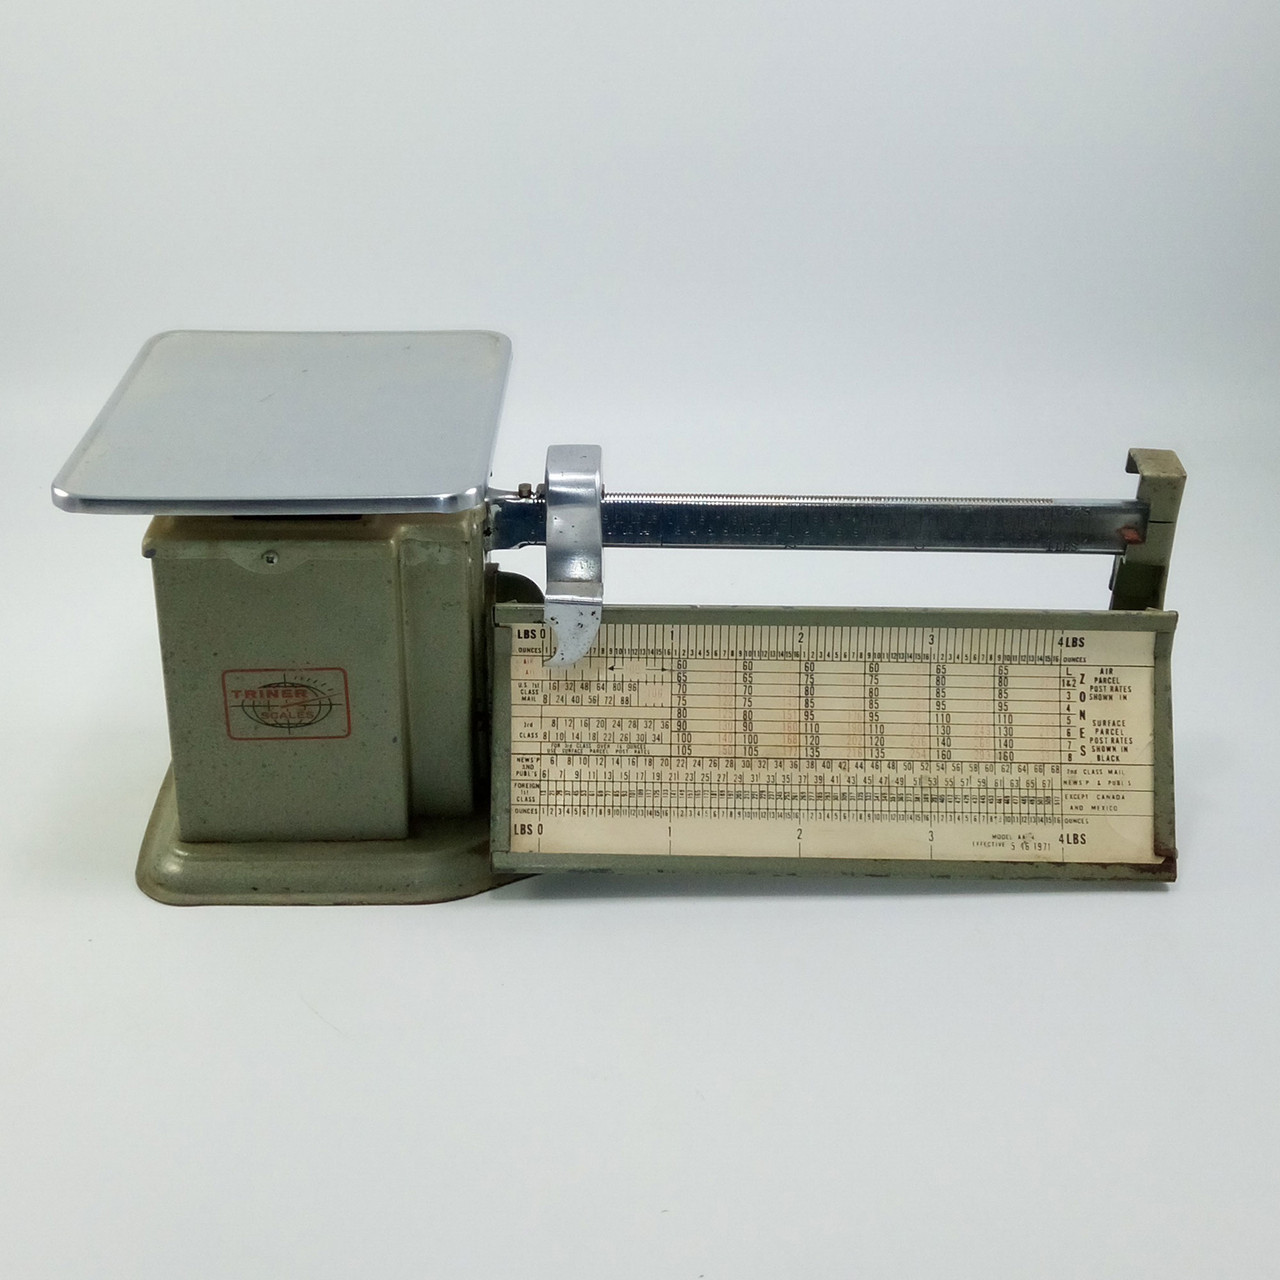 Triner Scale & MFG Co., est. 1903 - Made-in-Chicago Museum